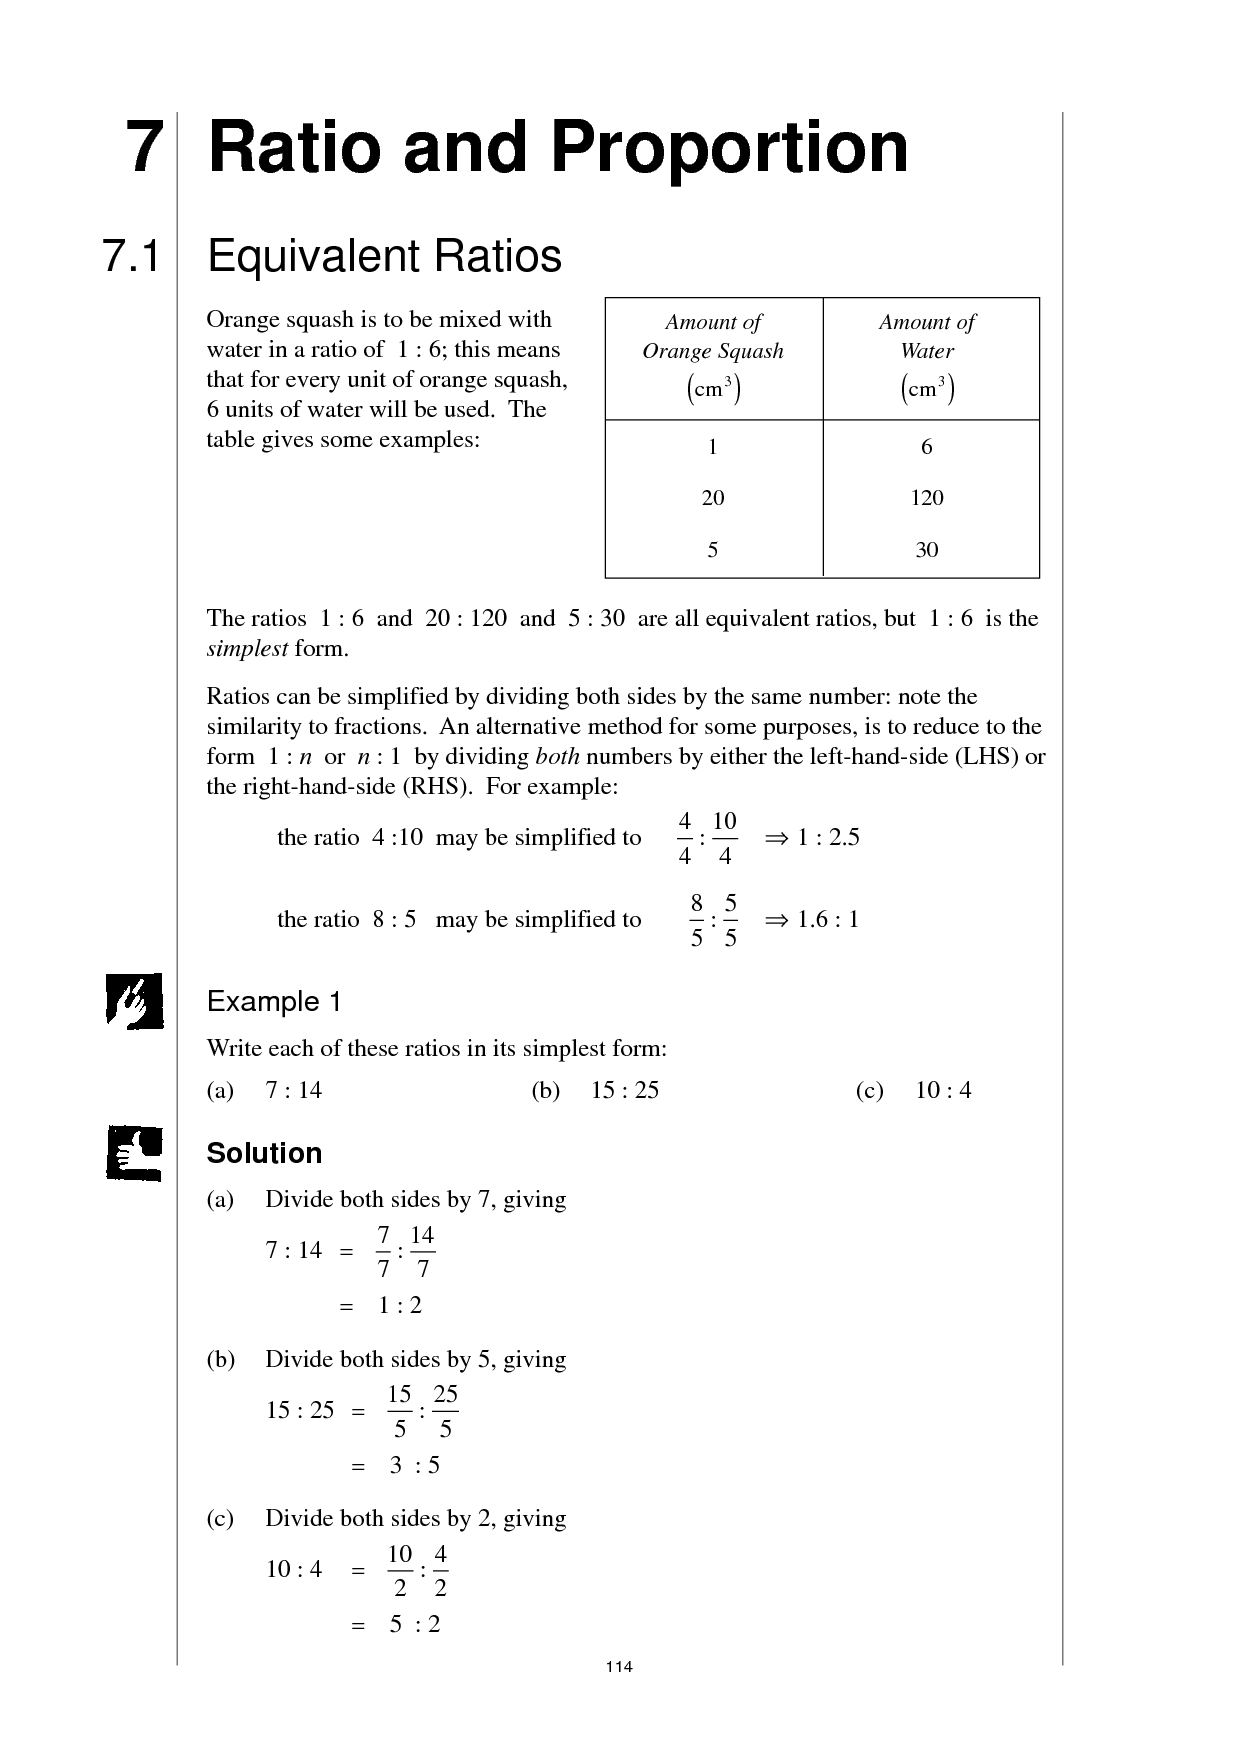 ratios-and-proportions-worksheet-7-1-answers-world-6-ratios-rates-and-proportional-reasoning